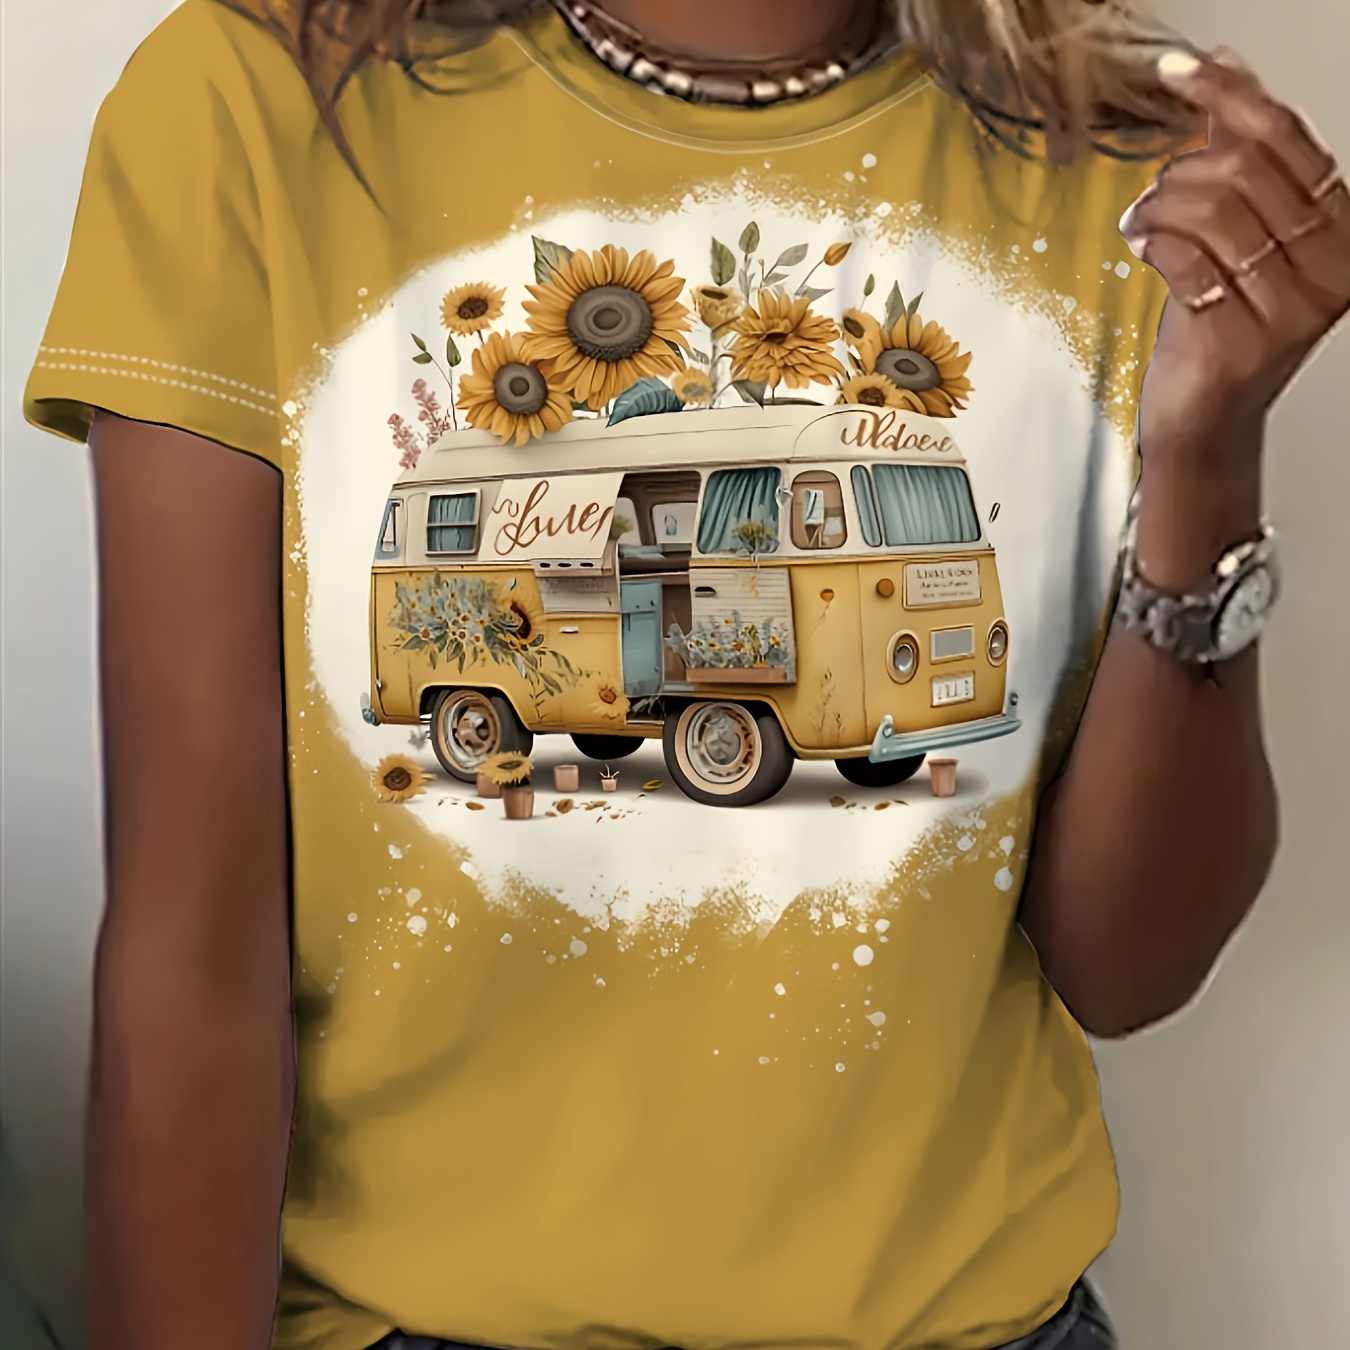 

Sunflower & Vintage Car Print Casual T-shirt, Crew Neck Short Sleeve Top For Spring & Summer, Women's Clothing